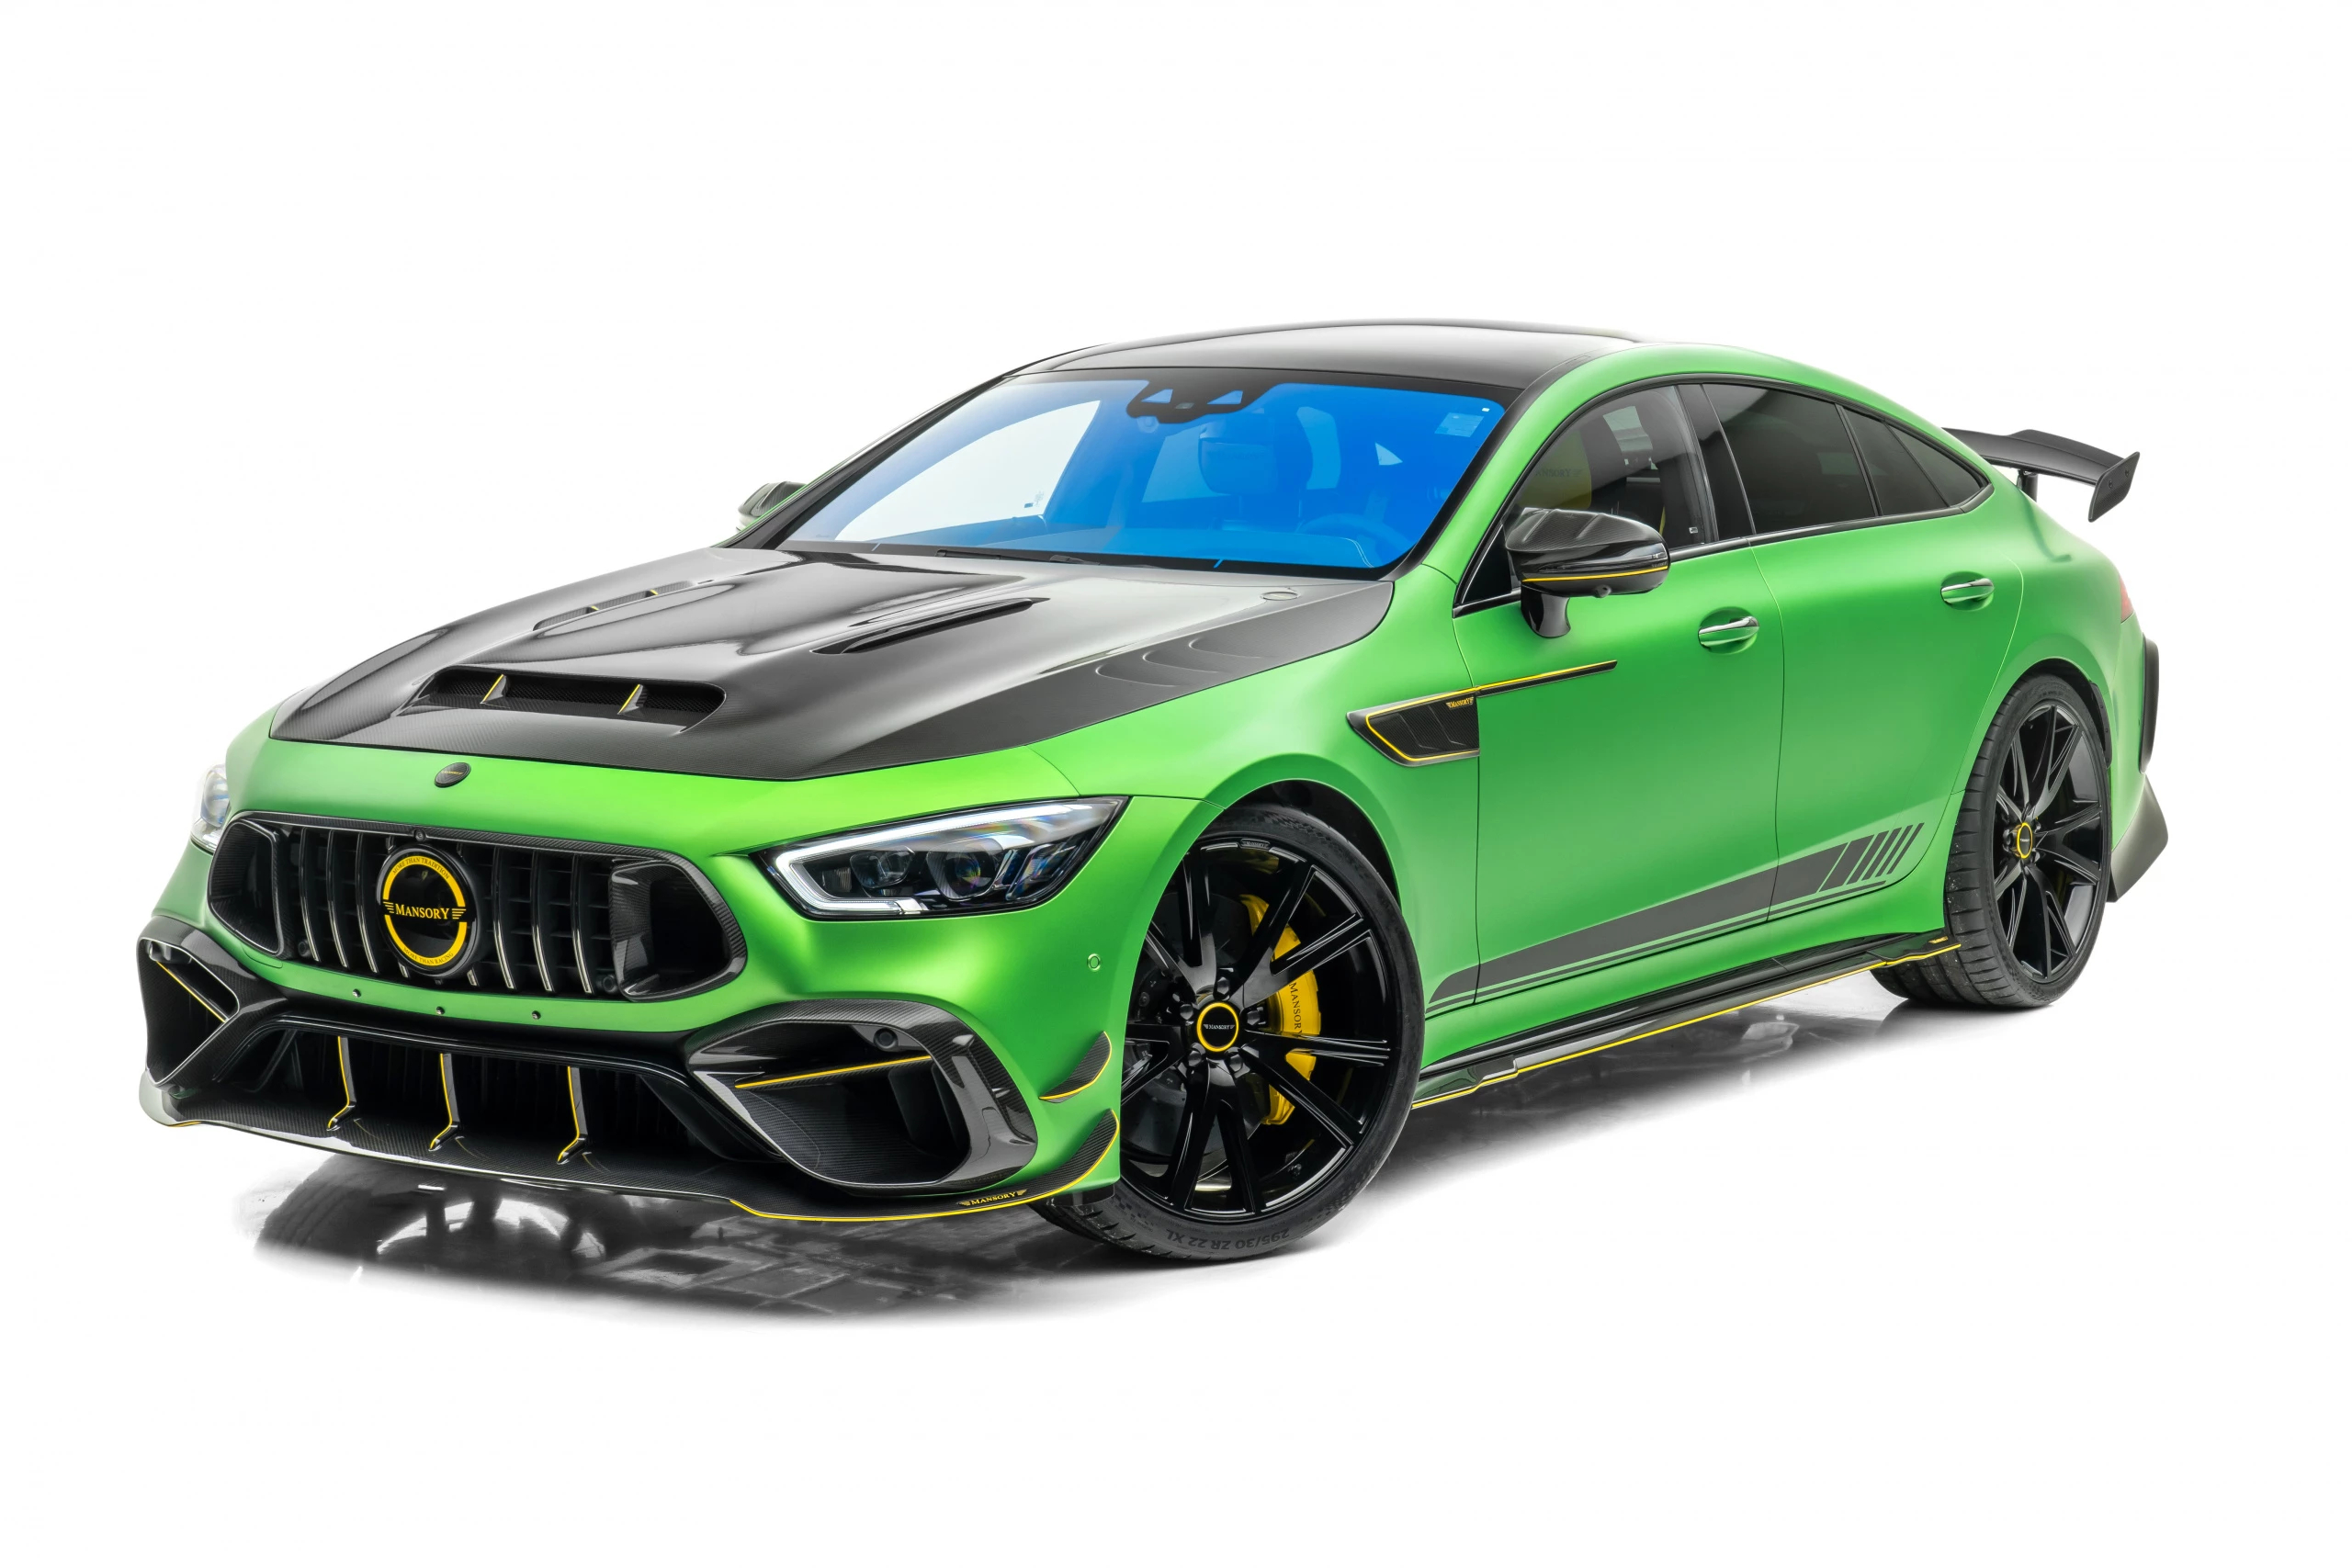 Mansory Introduces New Body Kit for Mercedes-AMG GT63 S E Performance